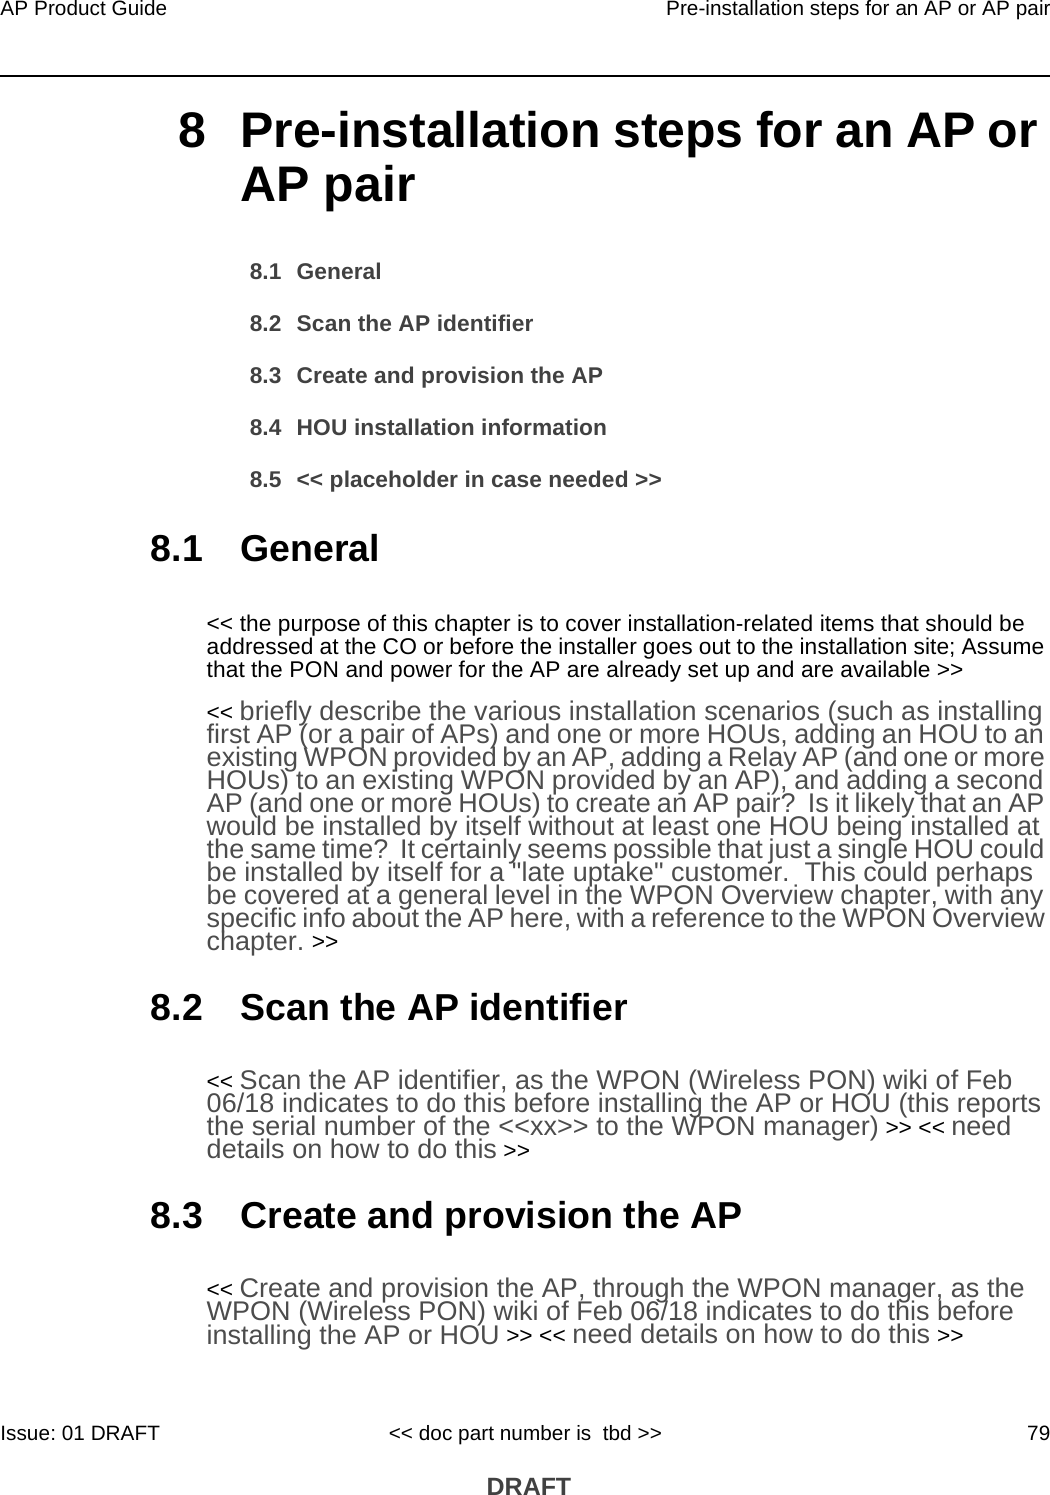 AP Product Guide Pre-installation steps for an AP or AP pairIssue: 01 DRAFT &lt;&lt; doc part number is  tbd &gt;&gt; 79 DRAFT8 Pre-installation steps for an AP or AP pair8.1 General8.2 Scan the AP identifier8.3 Create and provision the AP8.4 HOU installation information8.5 &lt;&lt; placeholder in case needed &gt;&gt;8.1 General&lt;&lt; the purpose of this chapter is to cover installation-related items that should be addressed at the CO or before the installer goes out to the installation site; Assume that the PON and power for the AP are already set up and are available &gt;&gt;&lt;&lt; briefly describe the various installation scenarios (such as installing first AP (or a pair of APs) and one or more HOUs, adding an HOU to an existing WPON provided by an AP, adding a Relay AP (and one or more HOUs) to an existing WPON provided by an AP), and adding a second AP (and one or more HOUs) to create an AP pair?  Is it likely that an AP would be installed by itself without at least one HOU being installed at the same time?  It certainly seems possible that just a single HOU could be installed by itself for a &quot;late uptake&quot; customer.  This could perhaps be covered at a general level in the WPON Overview chapter, with any specific info about the AP here, with a reference to the WPON Overview chapter. &gt;&gt;8.2 Scan the AP identifier&lt;&lt; Scan the AP identifier, as the WPON (Wireless PON) wiki of Feb 06/18 indicates to do this before installing the AP or HOU (this reports the serial number of the &lt;&lt;xx&gt;&gt; to the WPON manager) &gt;&gt; &lt;&lt; need details on how to do this &gt;&gt;8.3 Create and provision the AP&lt;&lt; Create and provision the AP, through the WPON manager, as the WPON (Wireless PON) wiki of Feb 06/18 indicates to do this before installing the AP or HOU &gt;&gt; &lt;&lt; need details on how to do this &gt;&gt;